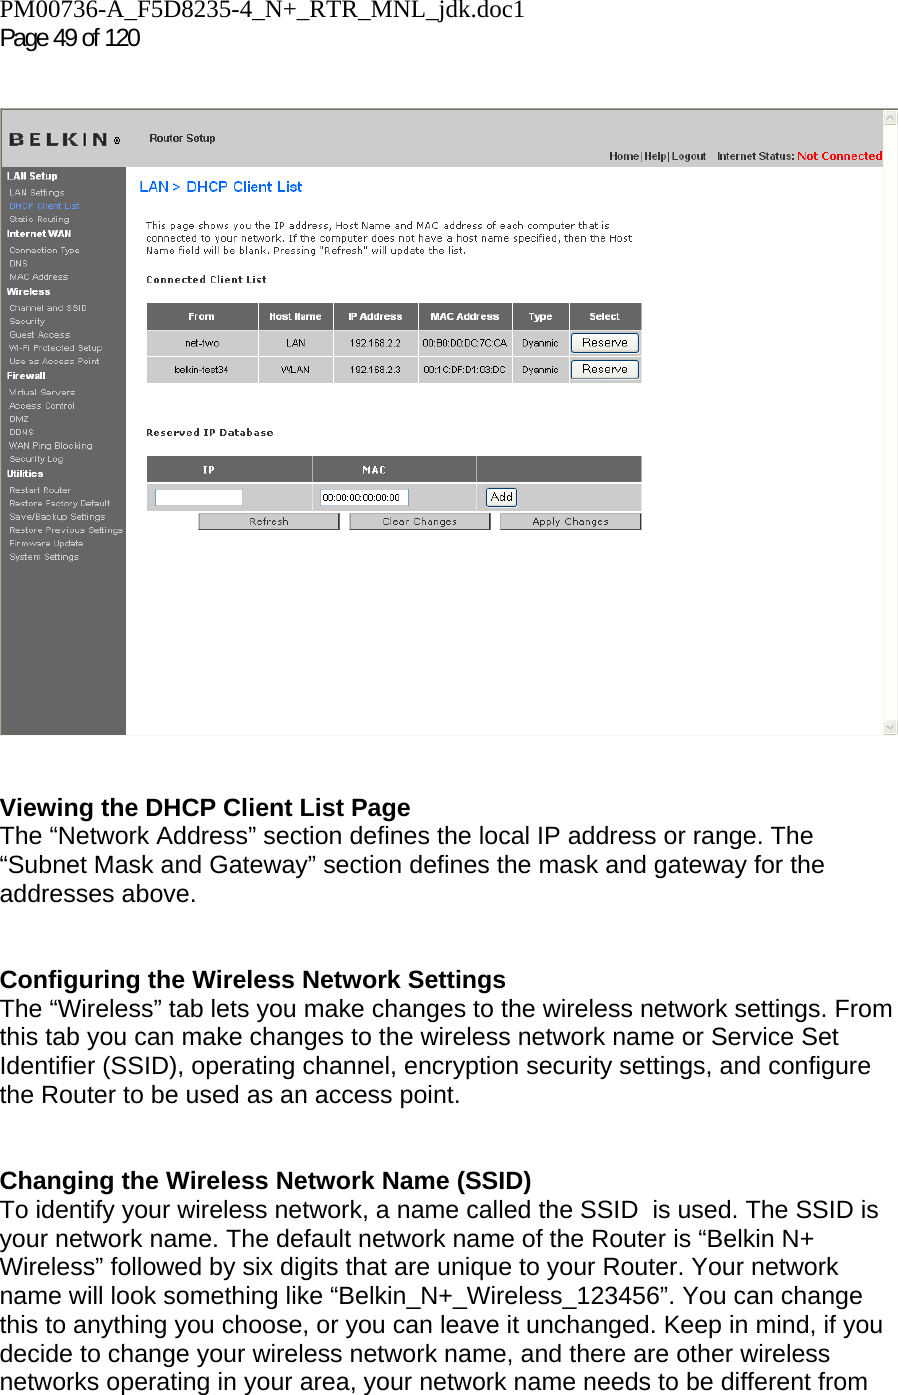 PM00736-A_F5D8235-4_N+_RTR_MNL_jdk.doc1  Page 49 of 120       Viewing the DHCP Client List Page The “Network Address” section defines the local IP address or range. The “Subnet Mask and Gateway” section defines the mask and gateway for the addresses above.     Configuring the Wireless Network Settings The “Wireless” tab lets you make changes to the wireless network settings. From this tab you can make changes to the wireless network name or Service Set Identifier (SSID), operating channel, encryption security settings, and configure the Router to be used as an access point.   Changing the Wireless Network Name (SSID) To identify your wireless network, a name called the SSID  is used. The SSID is your network name. The default network name of the Router is “Belkin N+ Wireless” followed by six digits that are unique to your Router. Your network name will look something like “Belkin_N+_Wireless_123456”. You can change this to anything you choose, or you can leave it unchanged. Keep in mind, if you decide to change your wireless network name, and there are other wireless networks operating in your area, your network name needs to be different from  